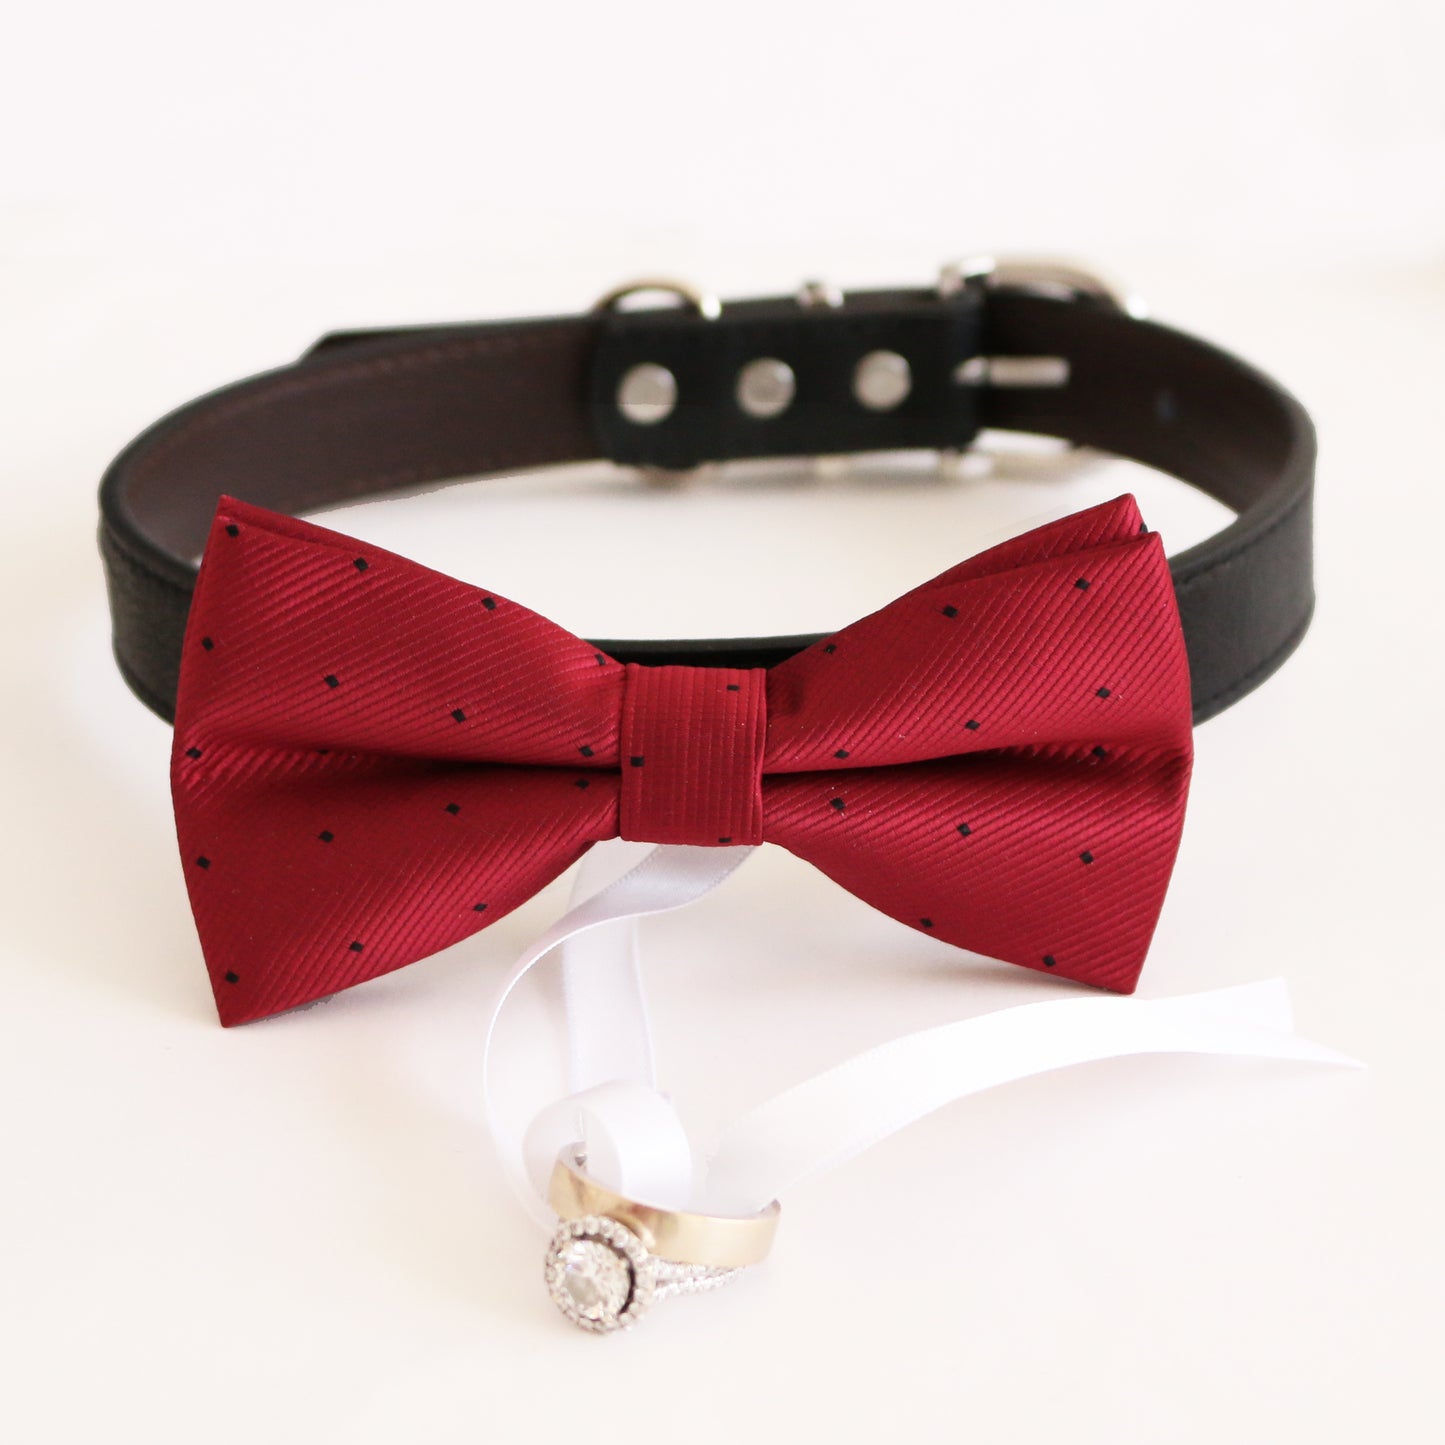 Red bow tie collar Leather collar Dog ring bearer ring bearer adjustable handmade XS to XXL collar bow, Puppy, Proposal, Red bow , Wedding dog collar